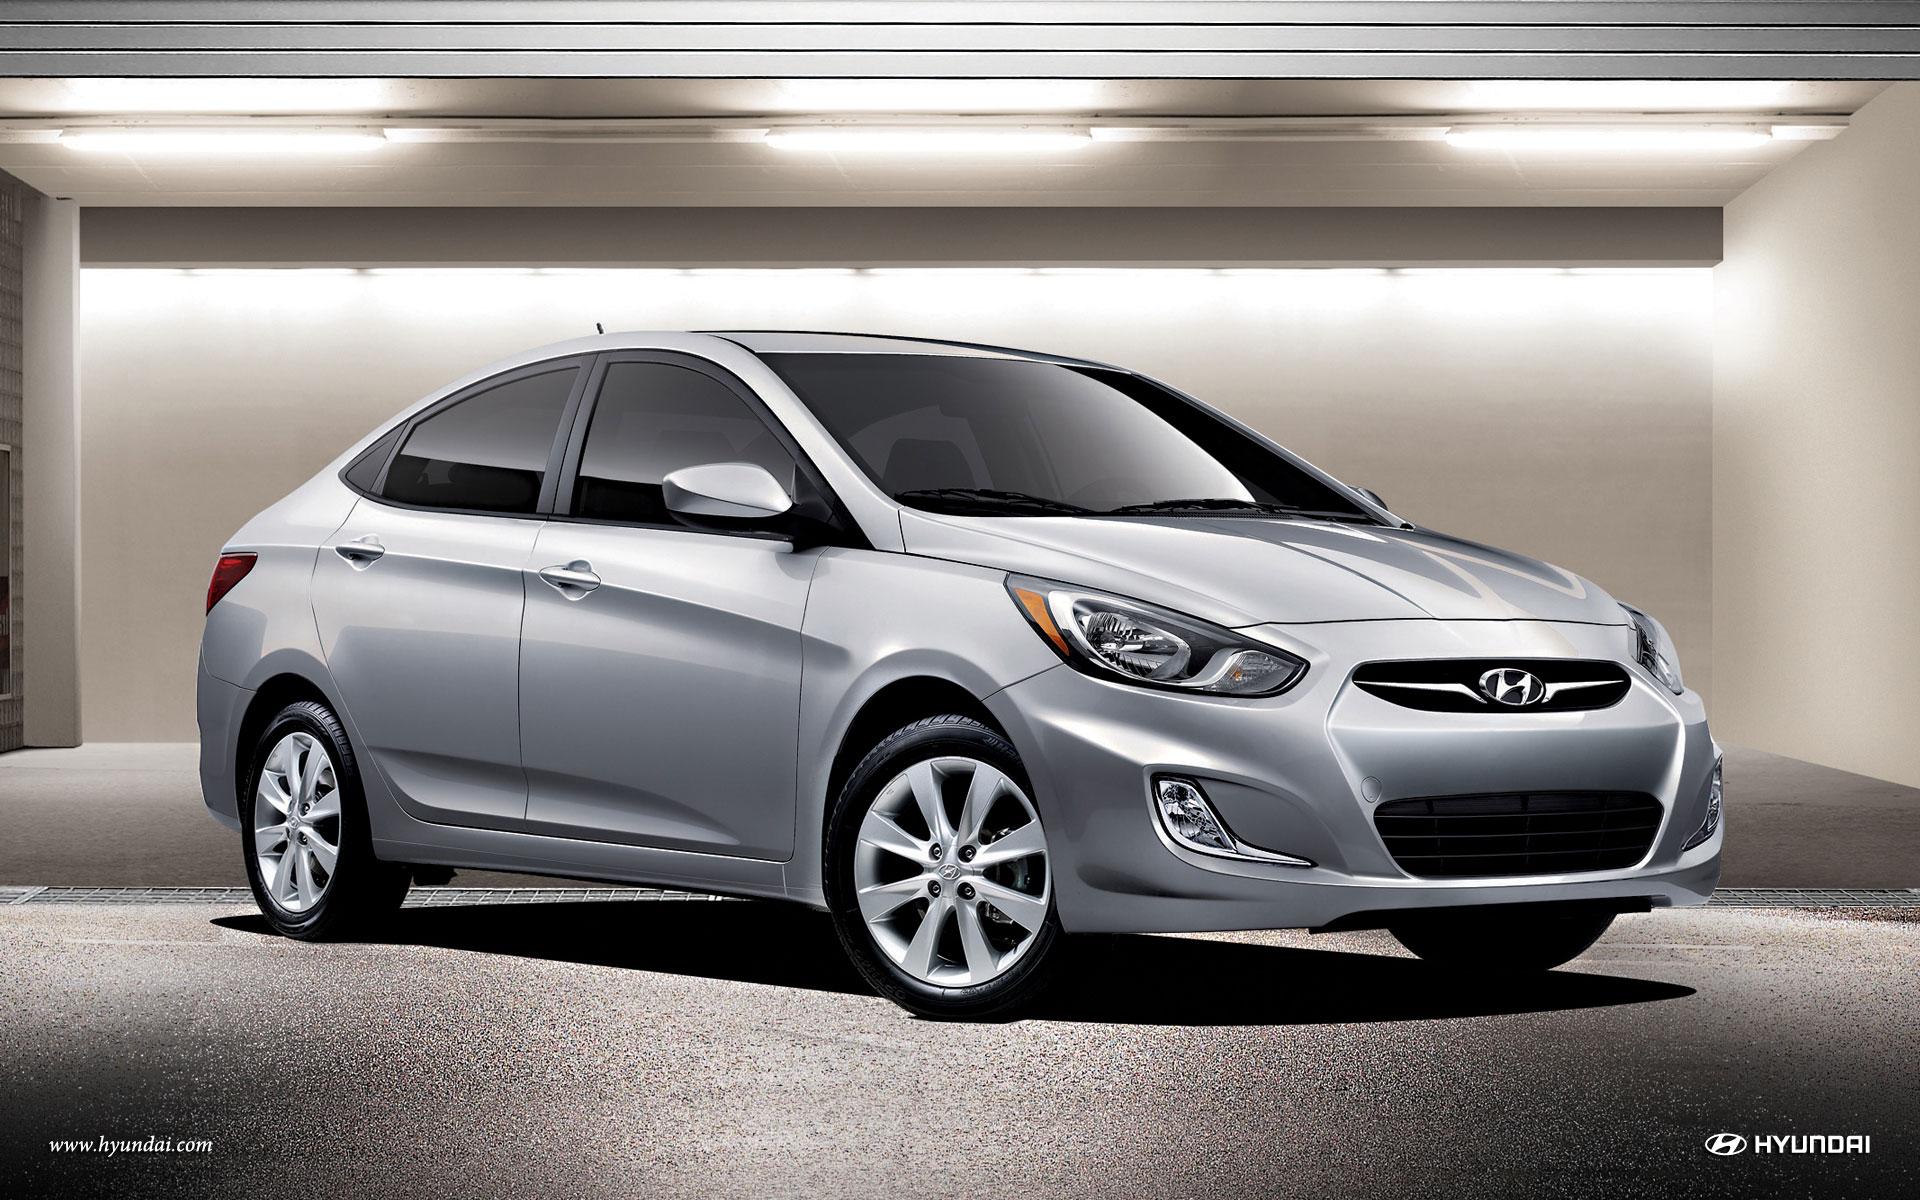 09.18.15 Hyundai Accent HD Background for PC ⇔ Full HDQ Picture